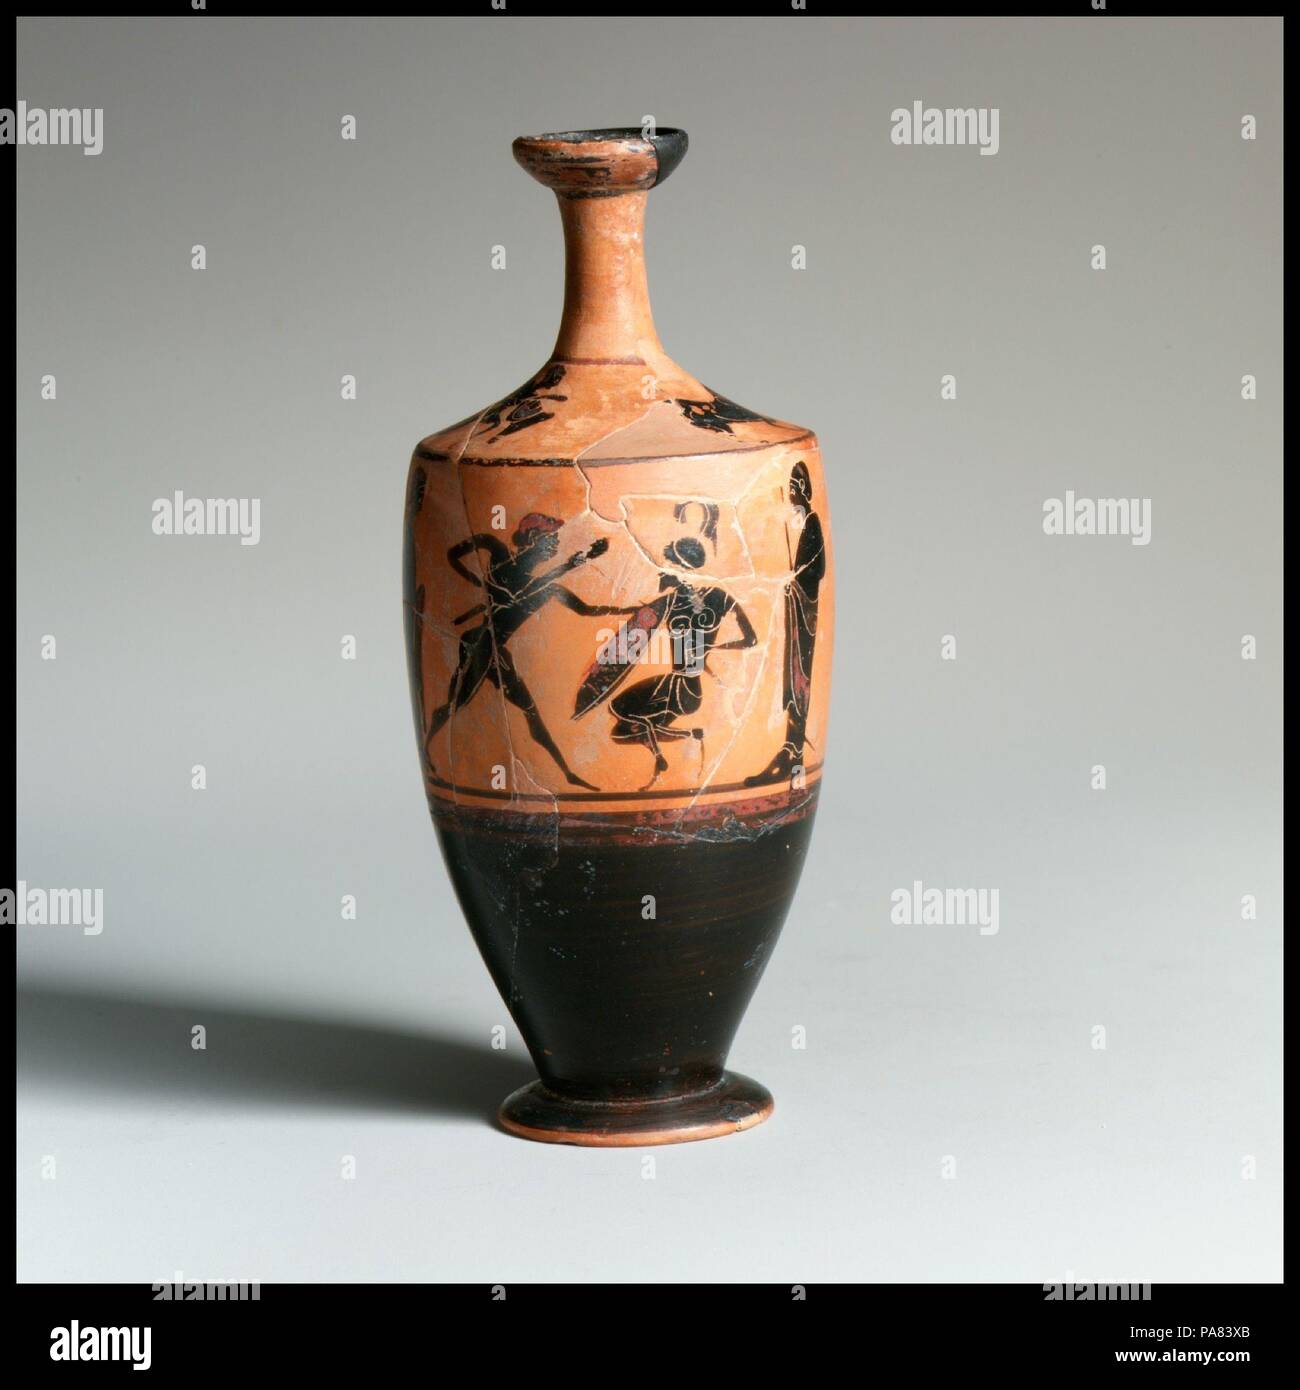 Terracotta lekythos (oil flask). Culture: Greek, Attic. Dimensions: H. 5 5/16 in. (13.5 cm). Date: ca. 500 B.C..  Herakles fighting Kyknos; on the shoulder, Herakles and the Lion. Museum: Metropolitan Museum of Art, New York, USA. Stock Photo